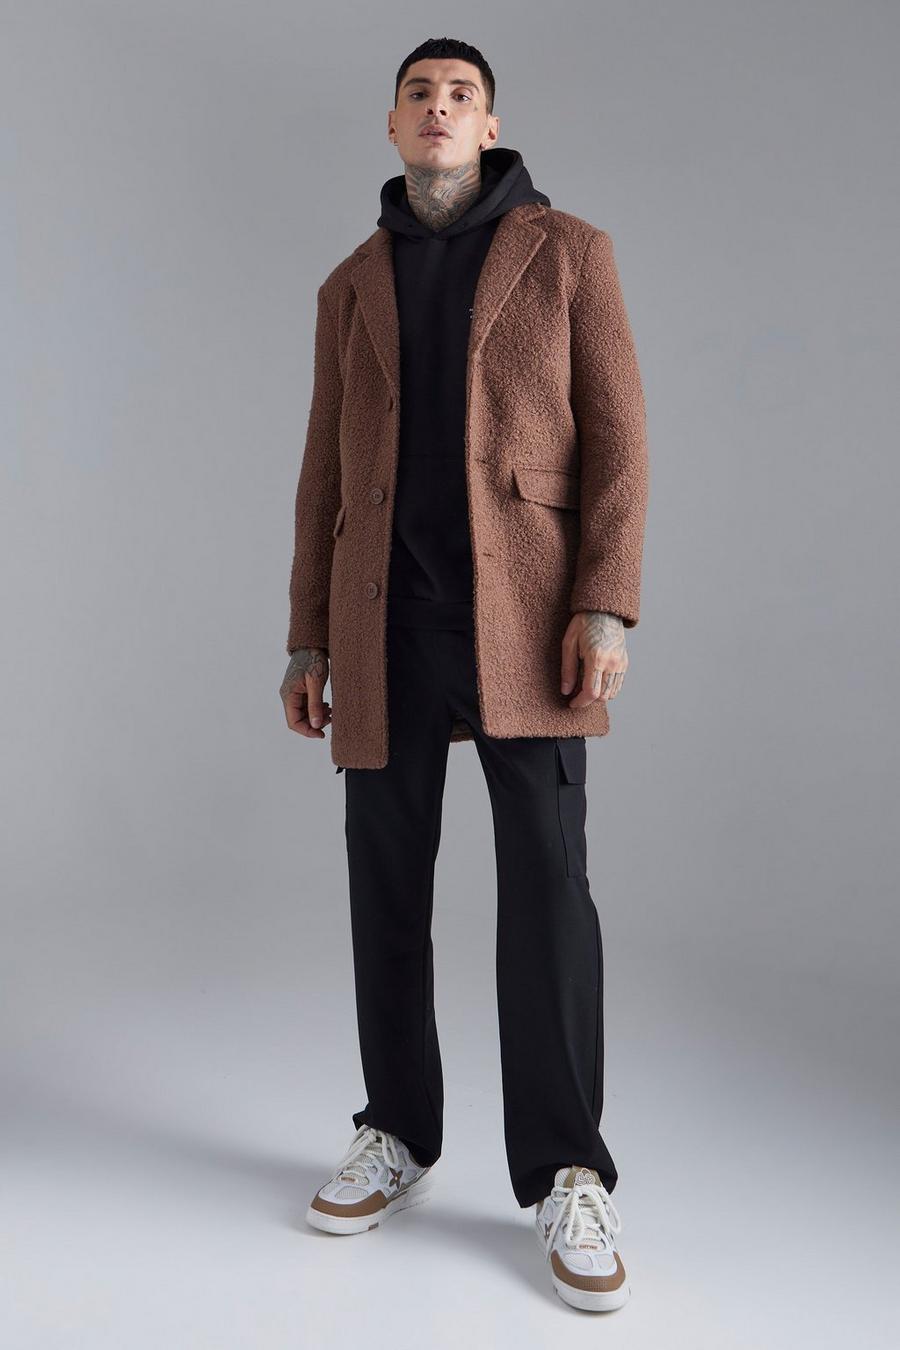 Chocolate brun Single Breasted Boucle Overcoat